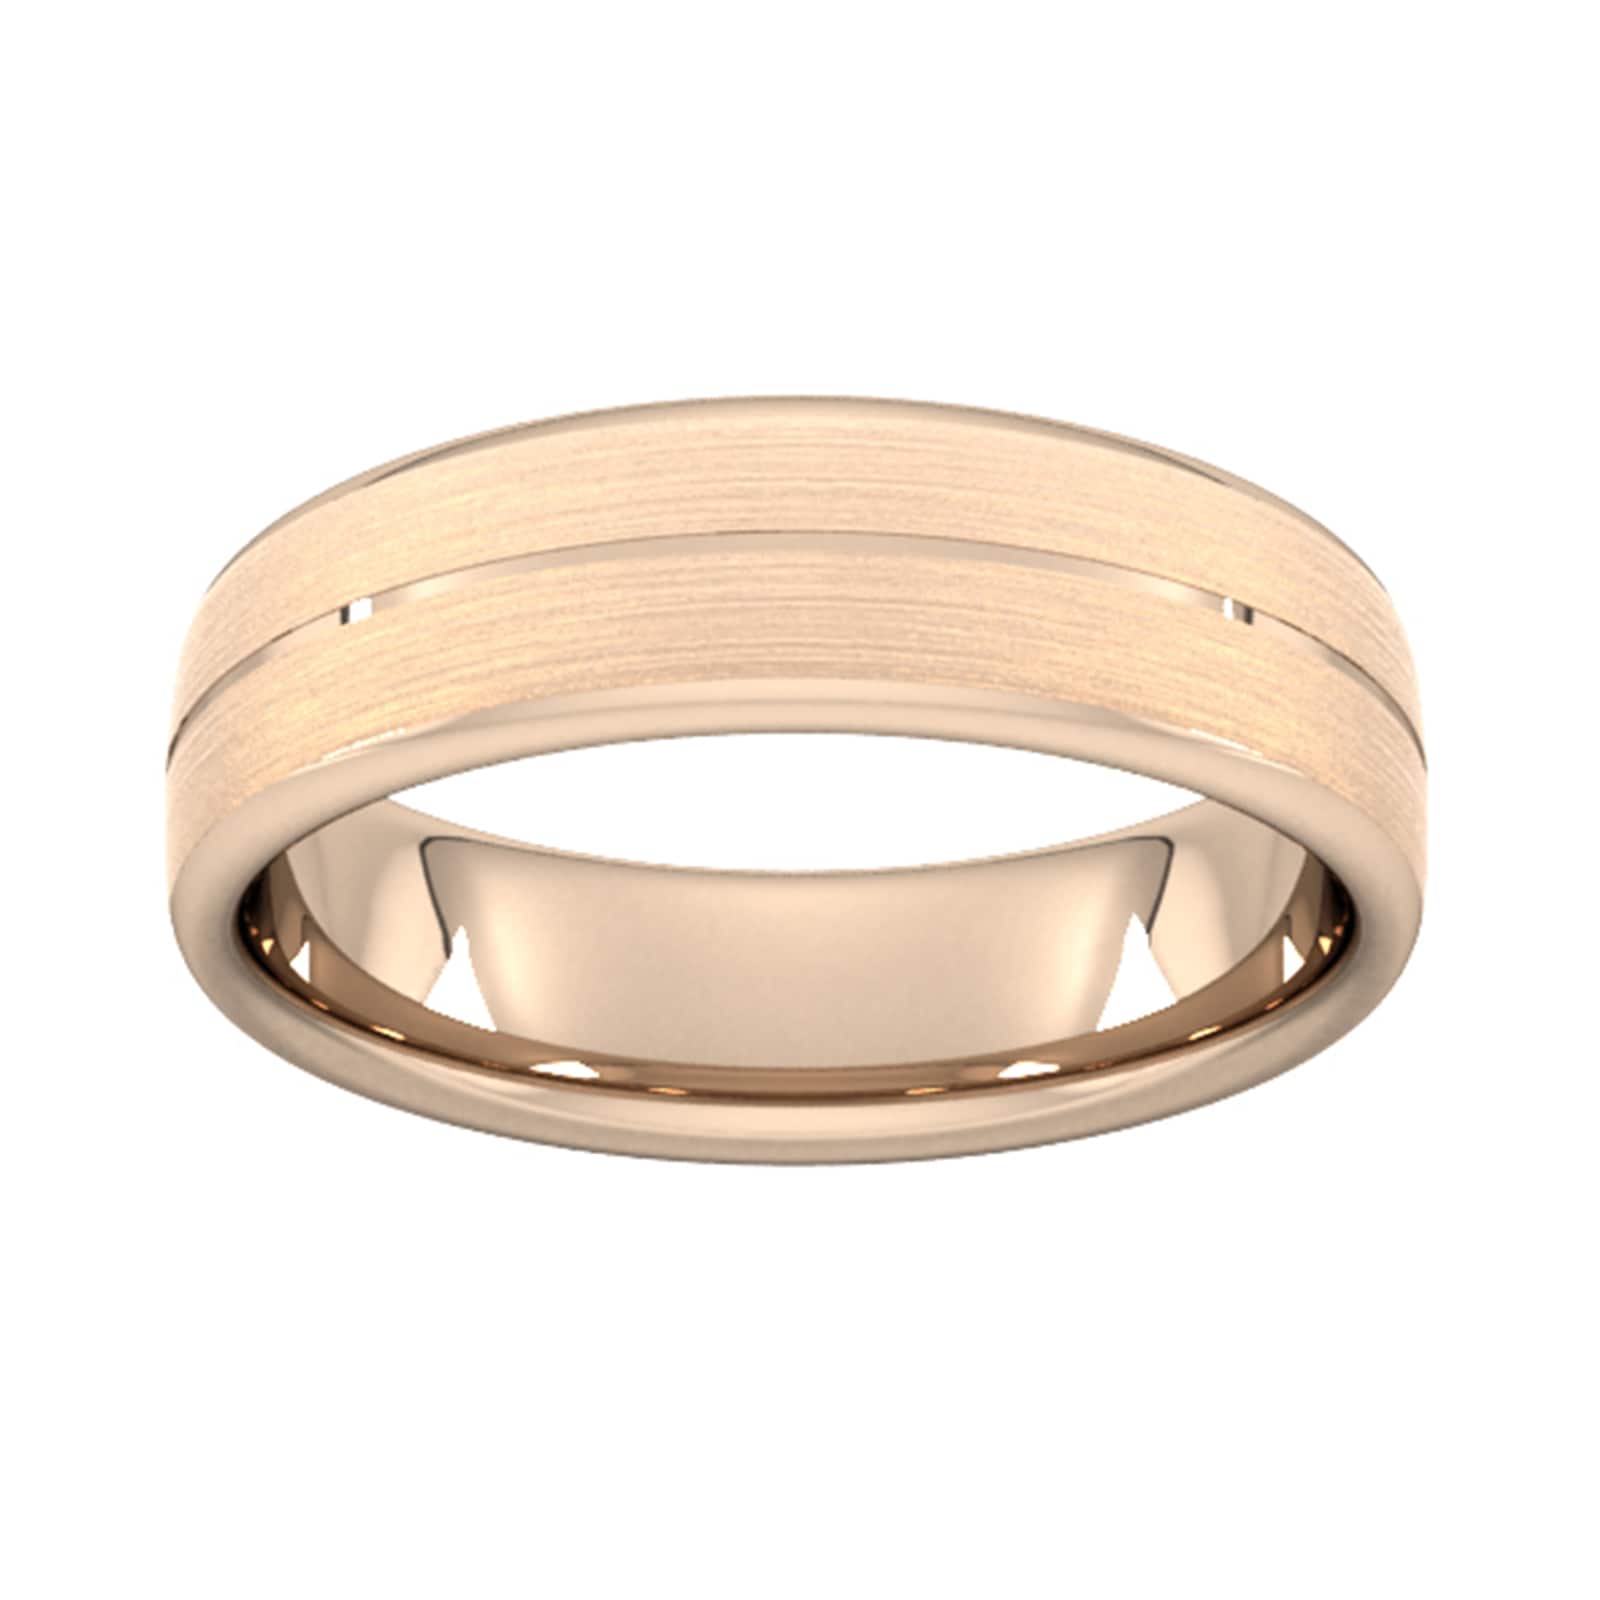 6mm Slight Court Standard Centre Groove With Chamfered Edge Wedding Ring In 9 Carat Rose Gold - Ring Size O